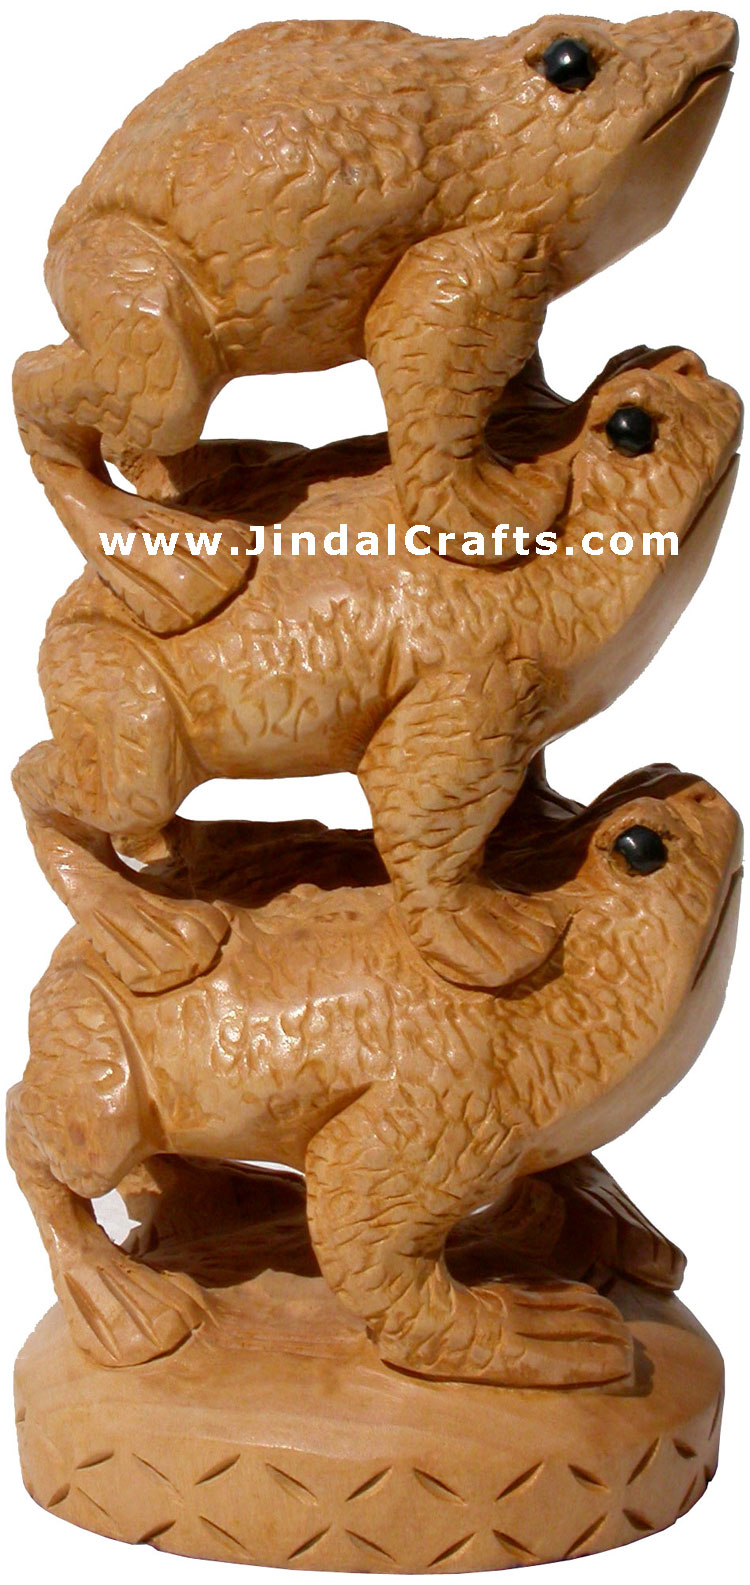 Wooden Frog Feng Shui Tower - Hand Carved Indian Artifacts Statues Lucky Idol